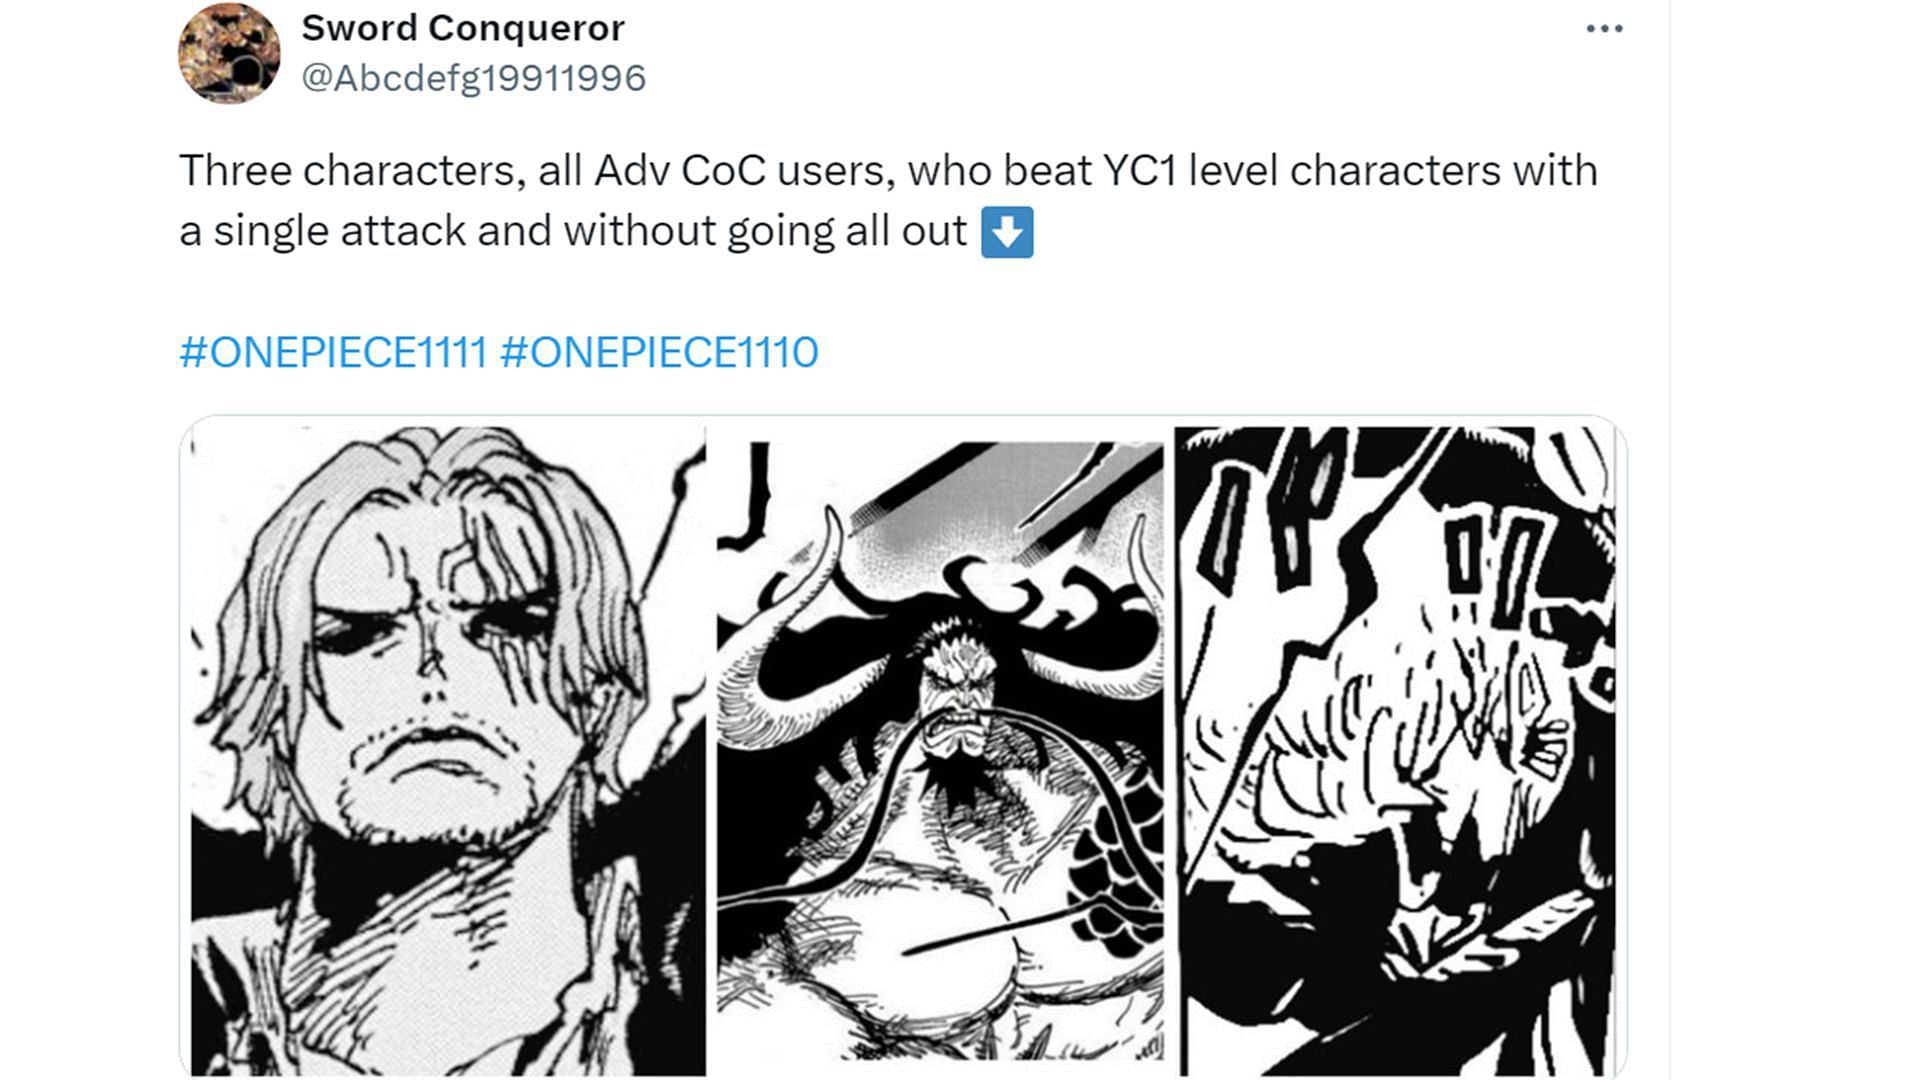 Zoro entered the realm of the strongest One Piece characters (Image via Sword Conqueror/X)